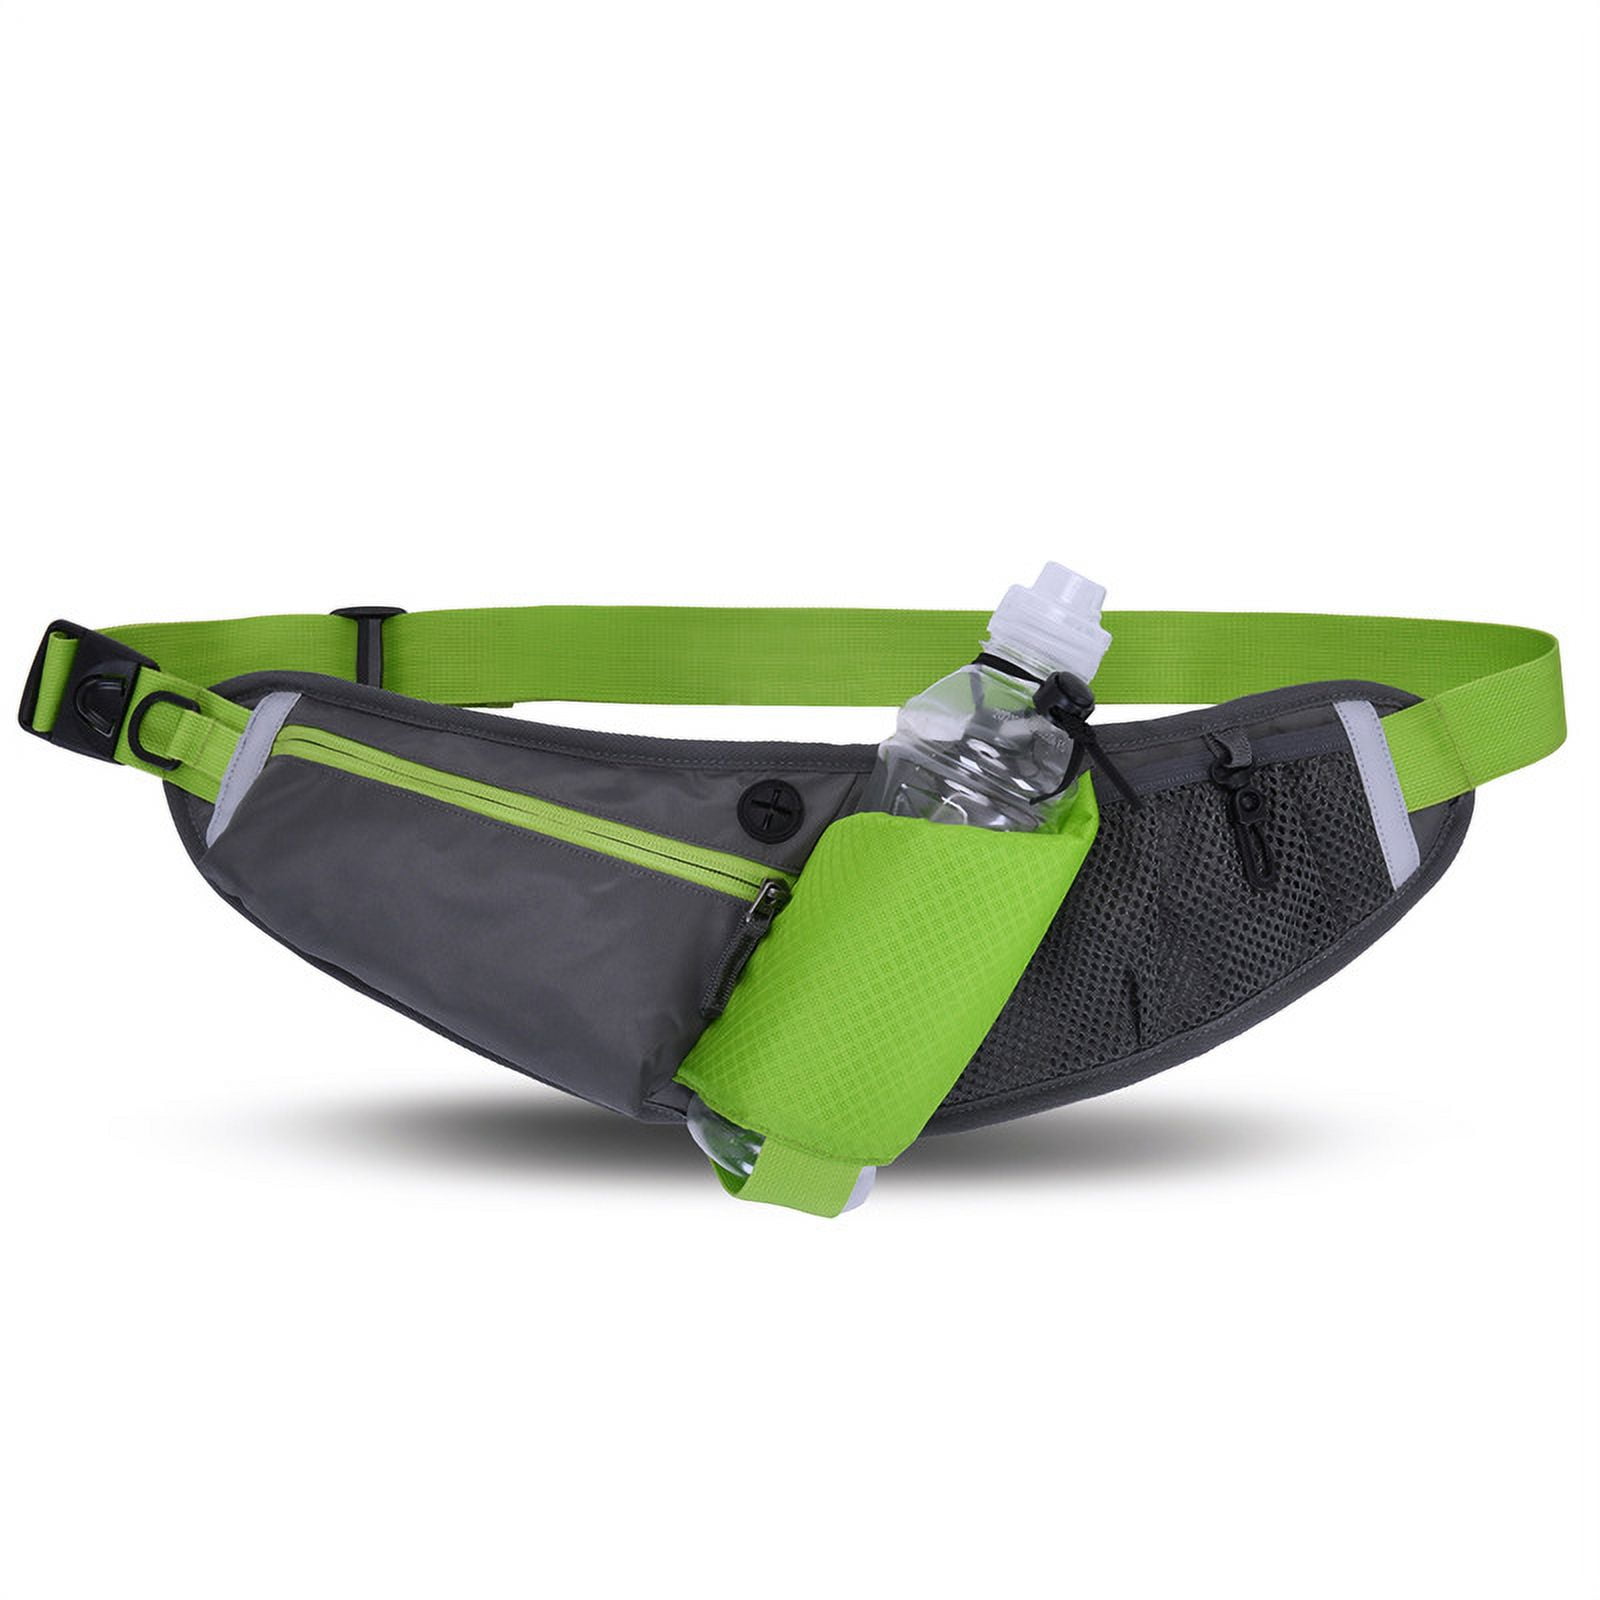 WATERFLY Fanny Pack for Women Men Water Resistant Small Waist